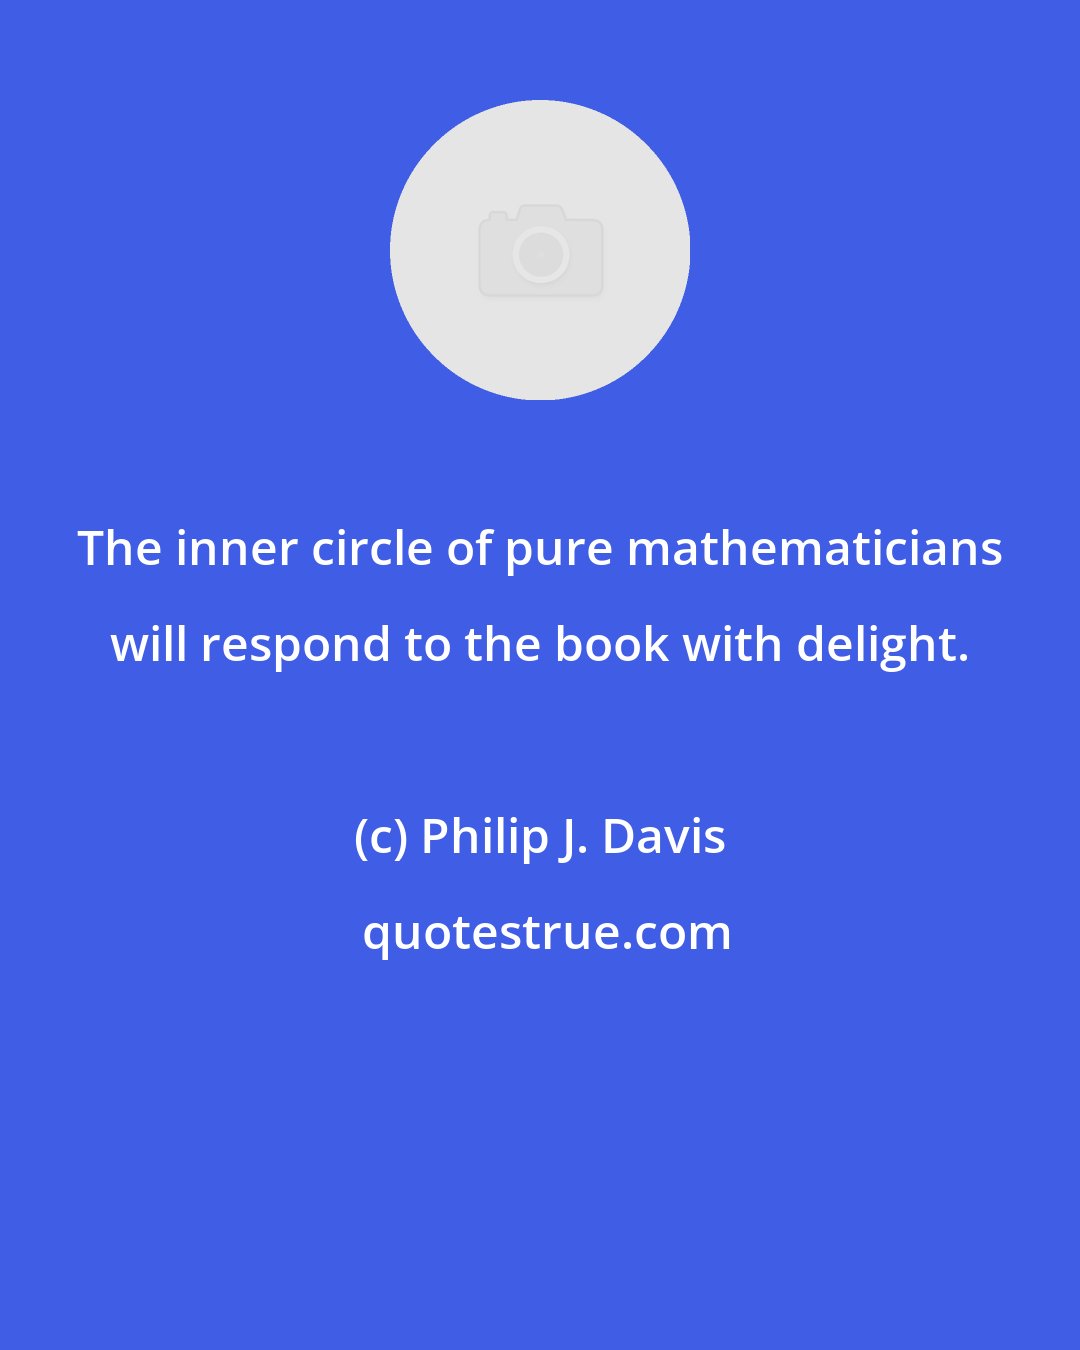 Philip J. Davis: The inner circle of pure mathematicians will respond to the book with delight.